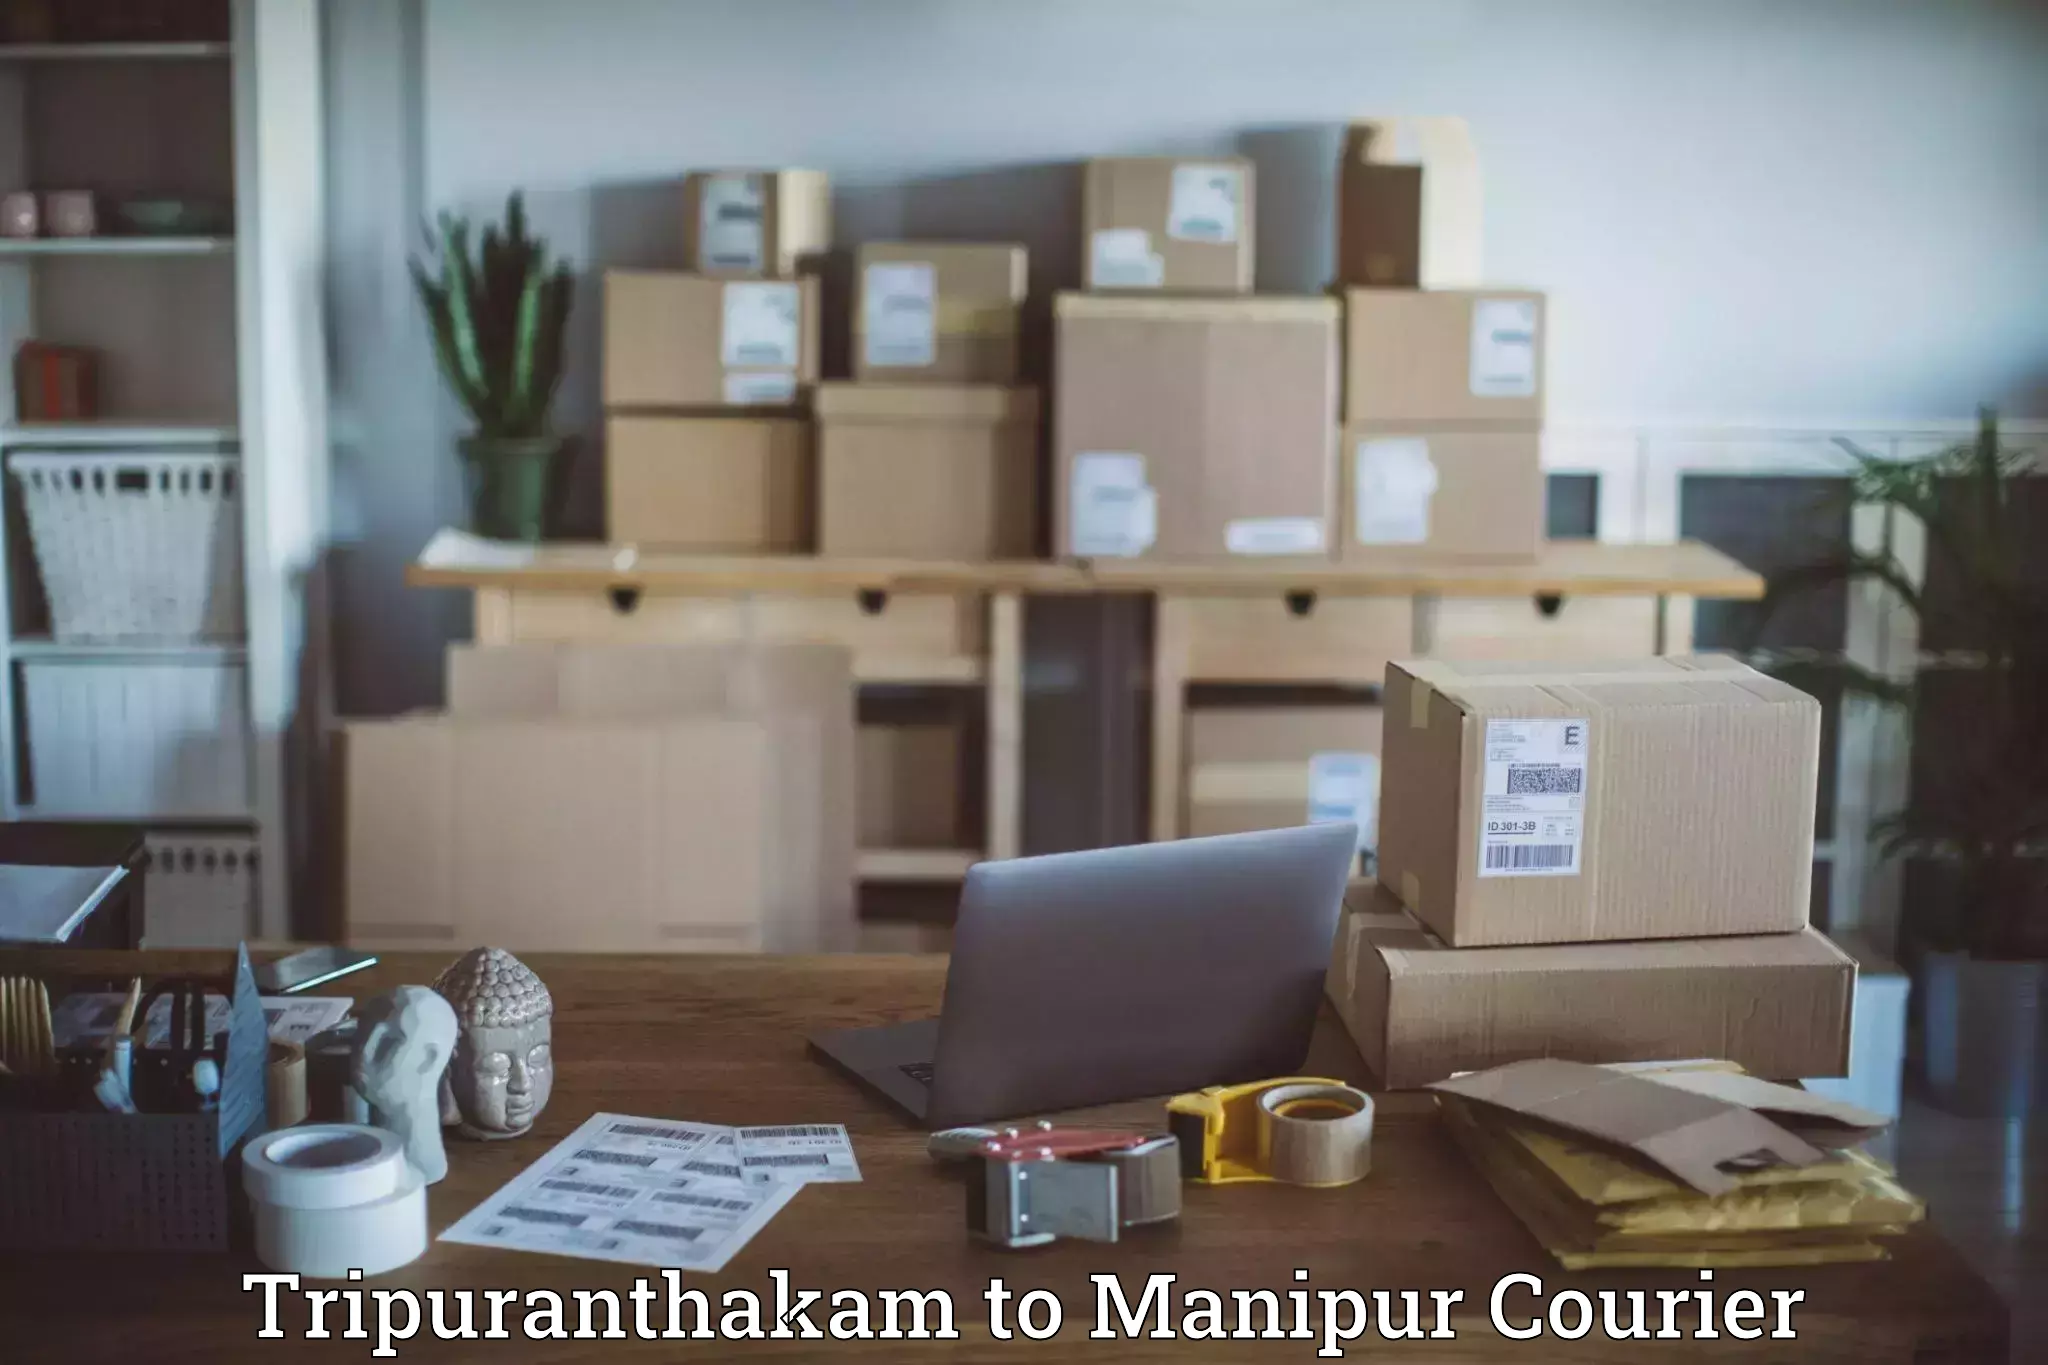 Cash on delivery service Tripuranthakam to Manipur